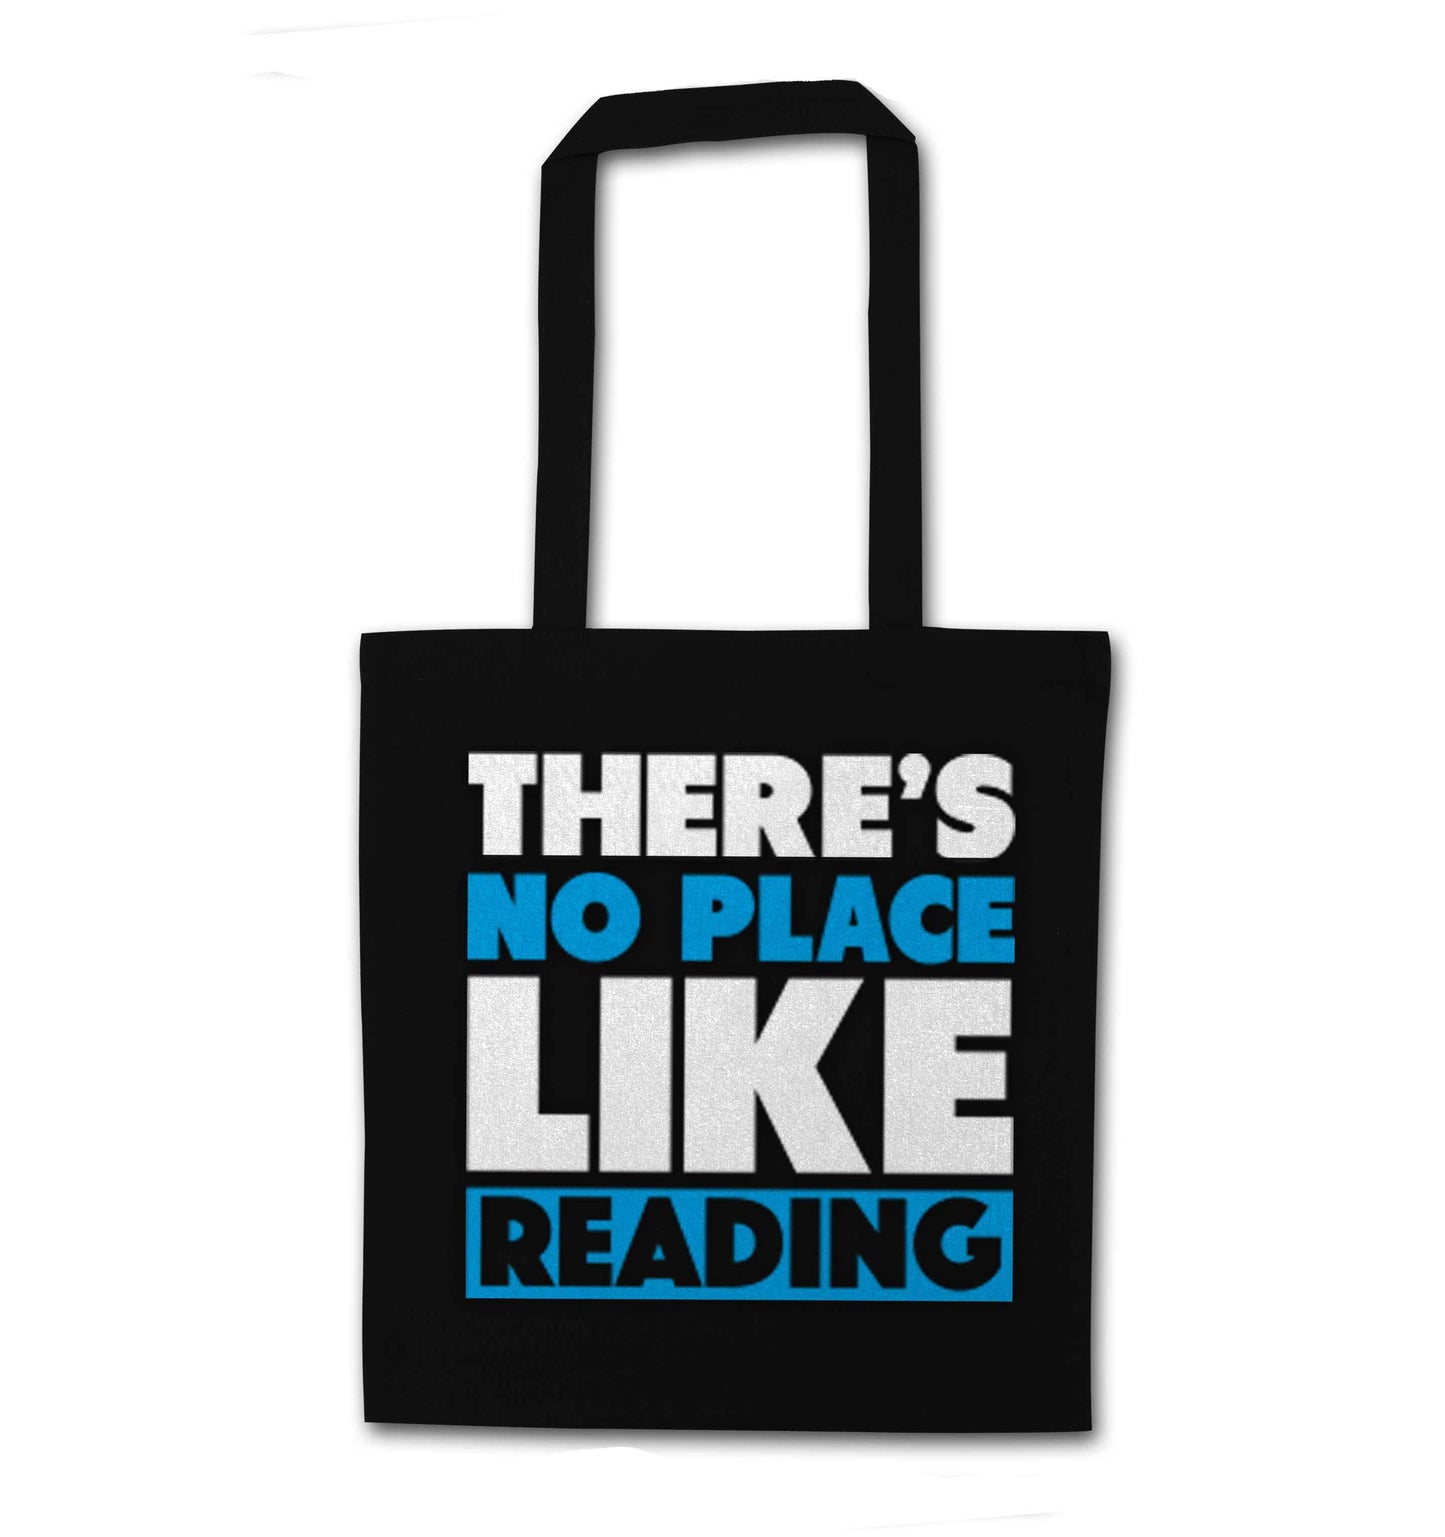 There's no place like Readingblack tote bag